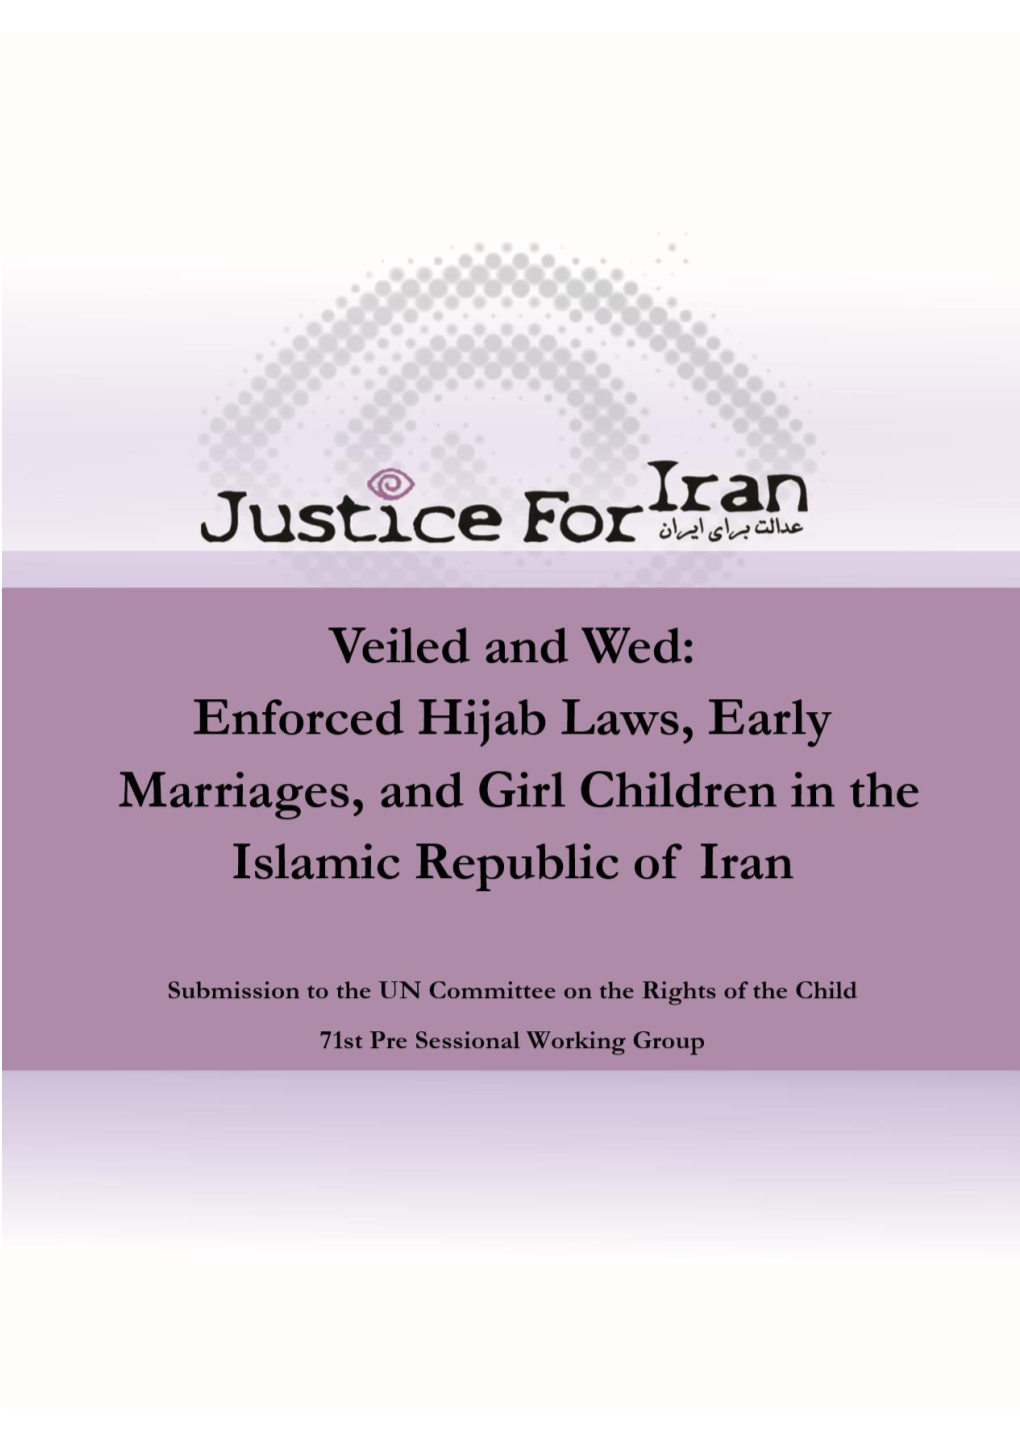 Veiled and Wed: Enforced Hijab Laws, Early Marriages, and Girl Children in the Islamic Republic of Iran